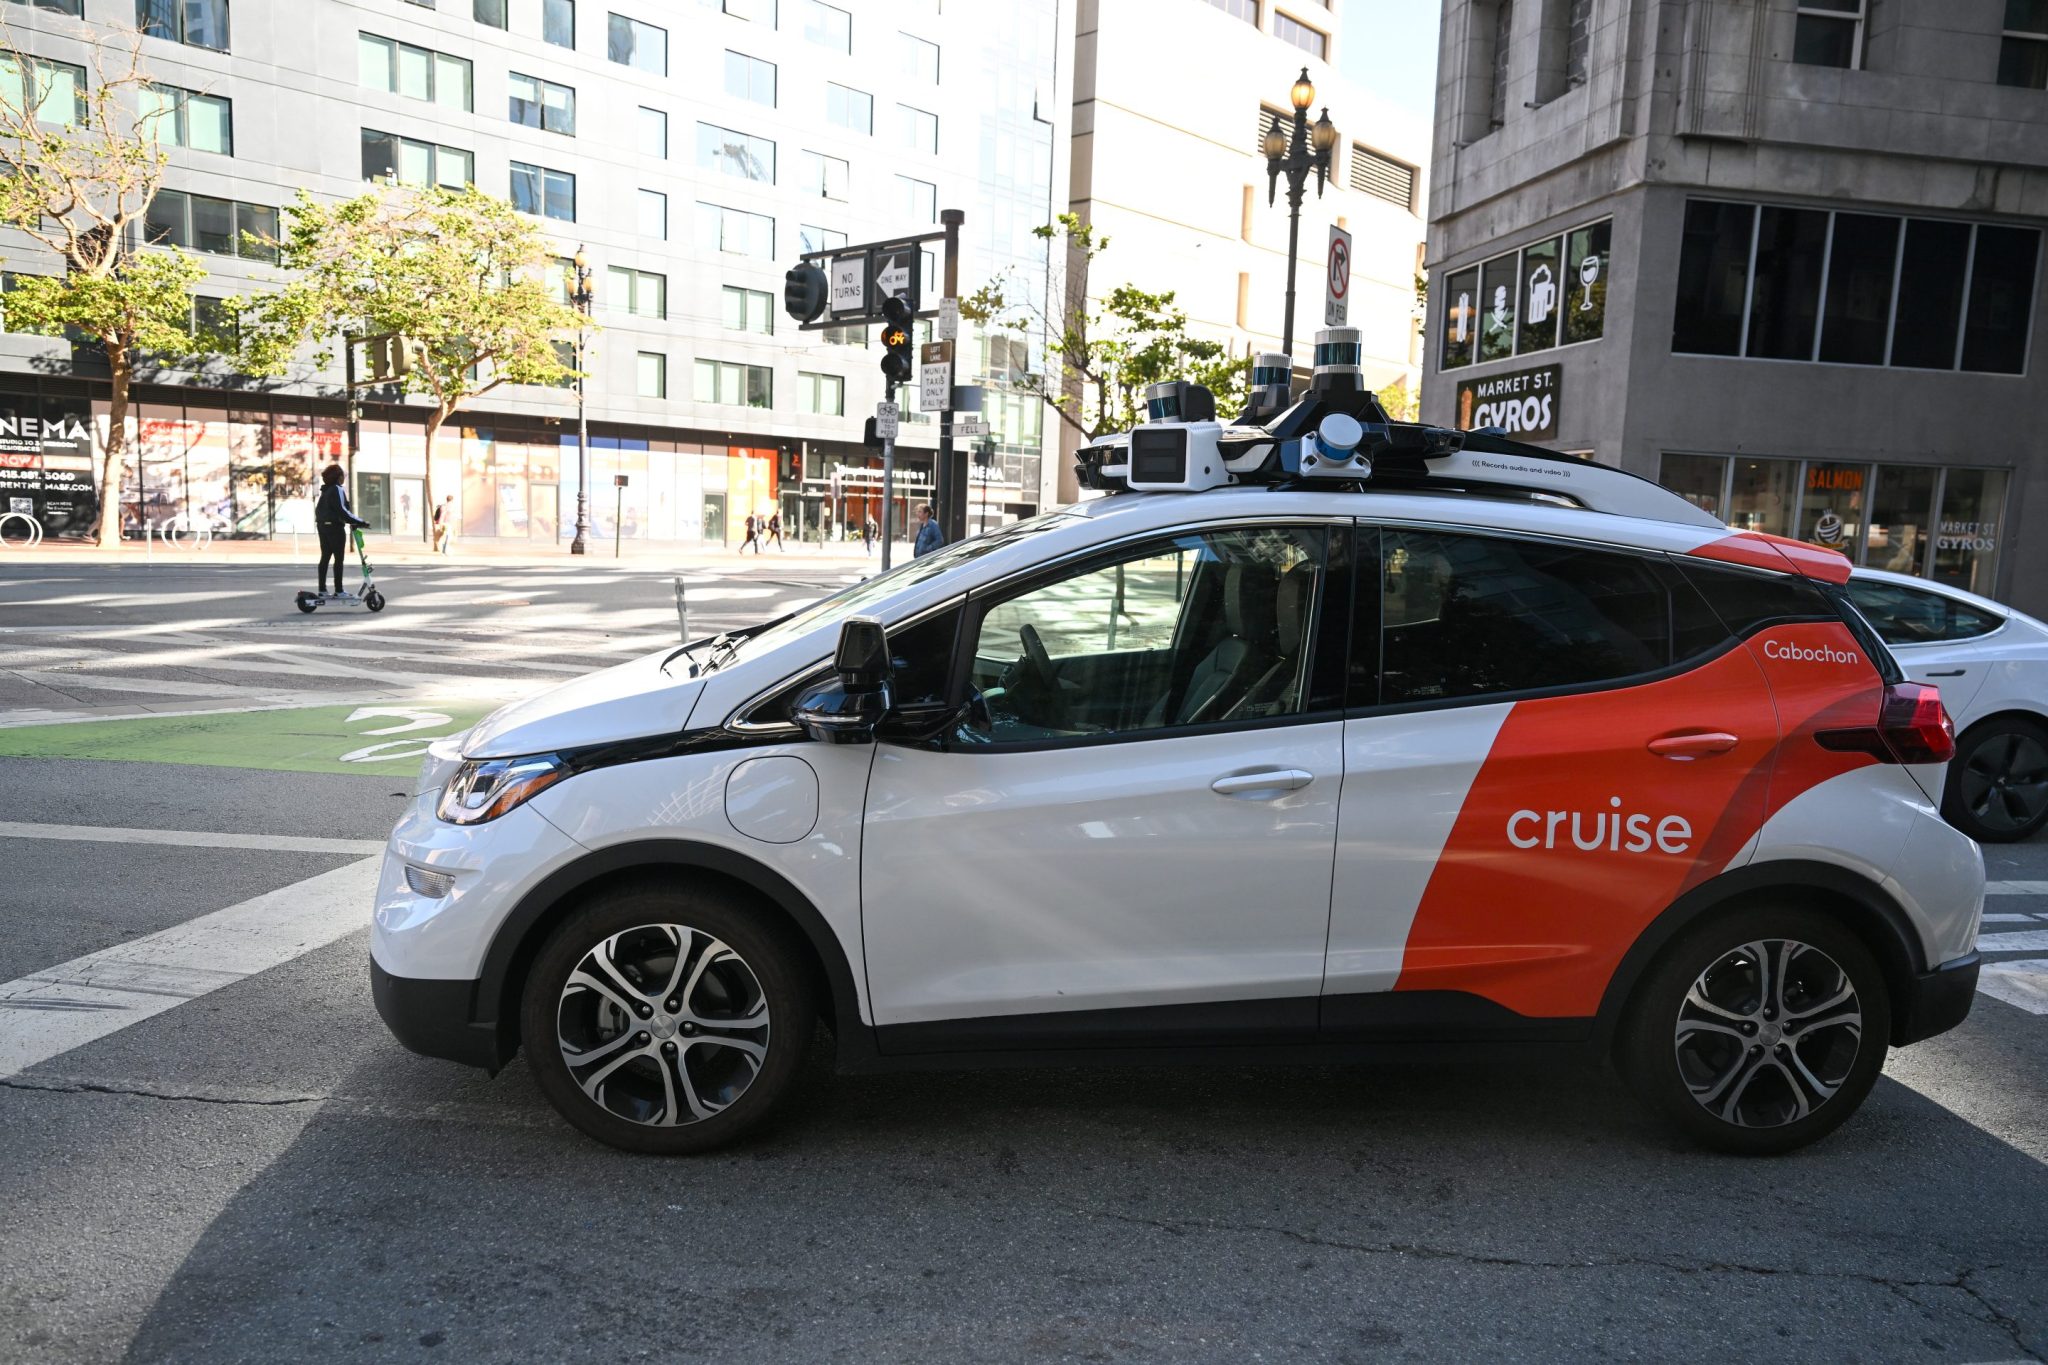 Federal regulators are investigating whether Cruise robotaxis are risky to pedestrians following several accidents